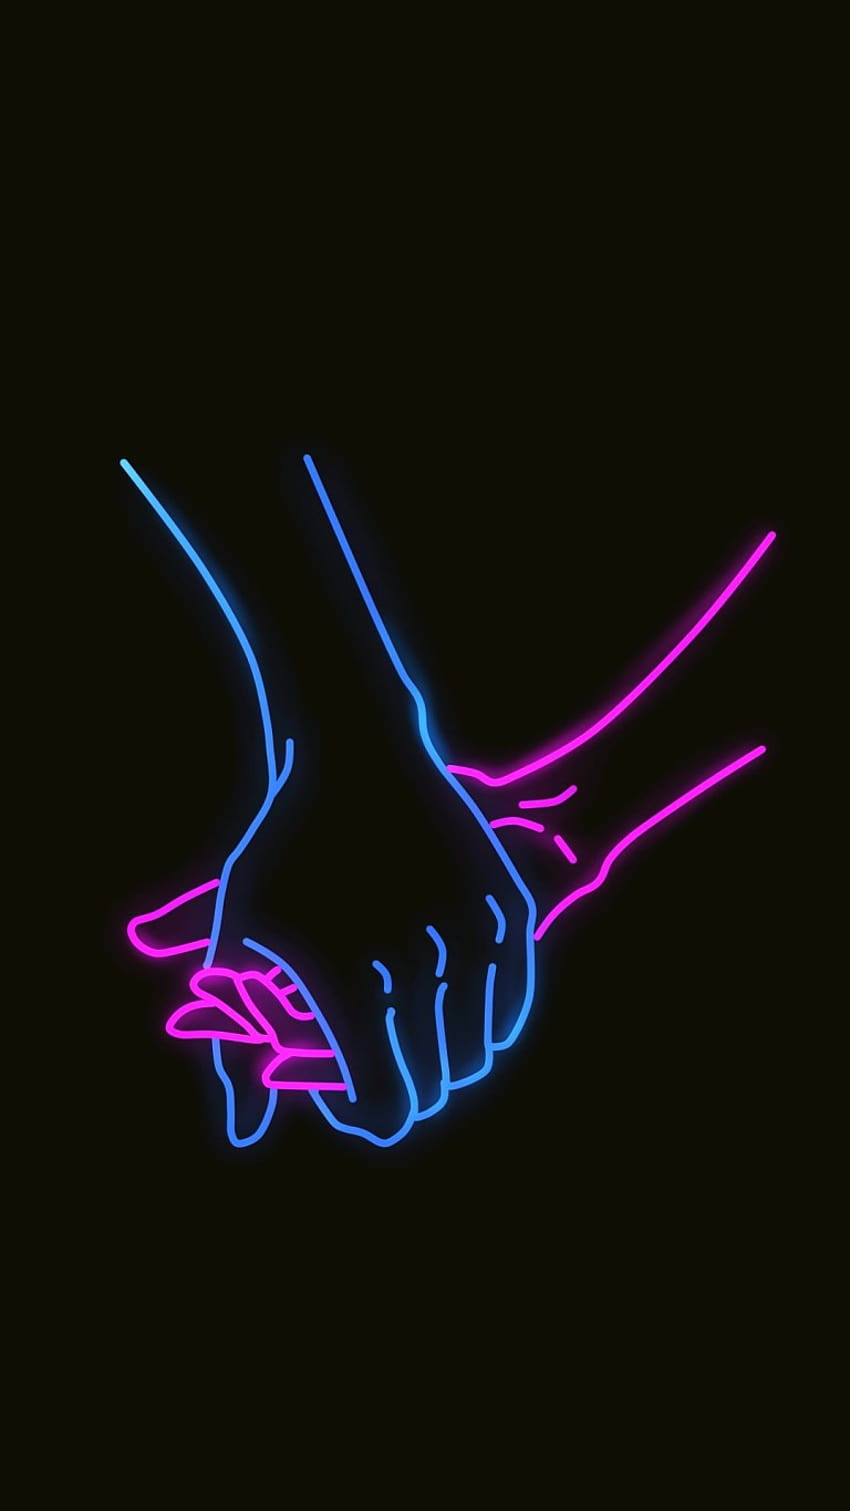 Holding Hands Neon Black Love Android, black relationships HD phone wallpaper